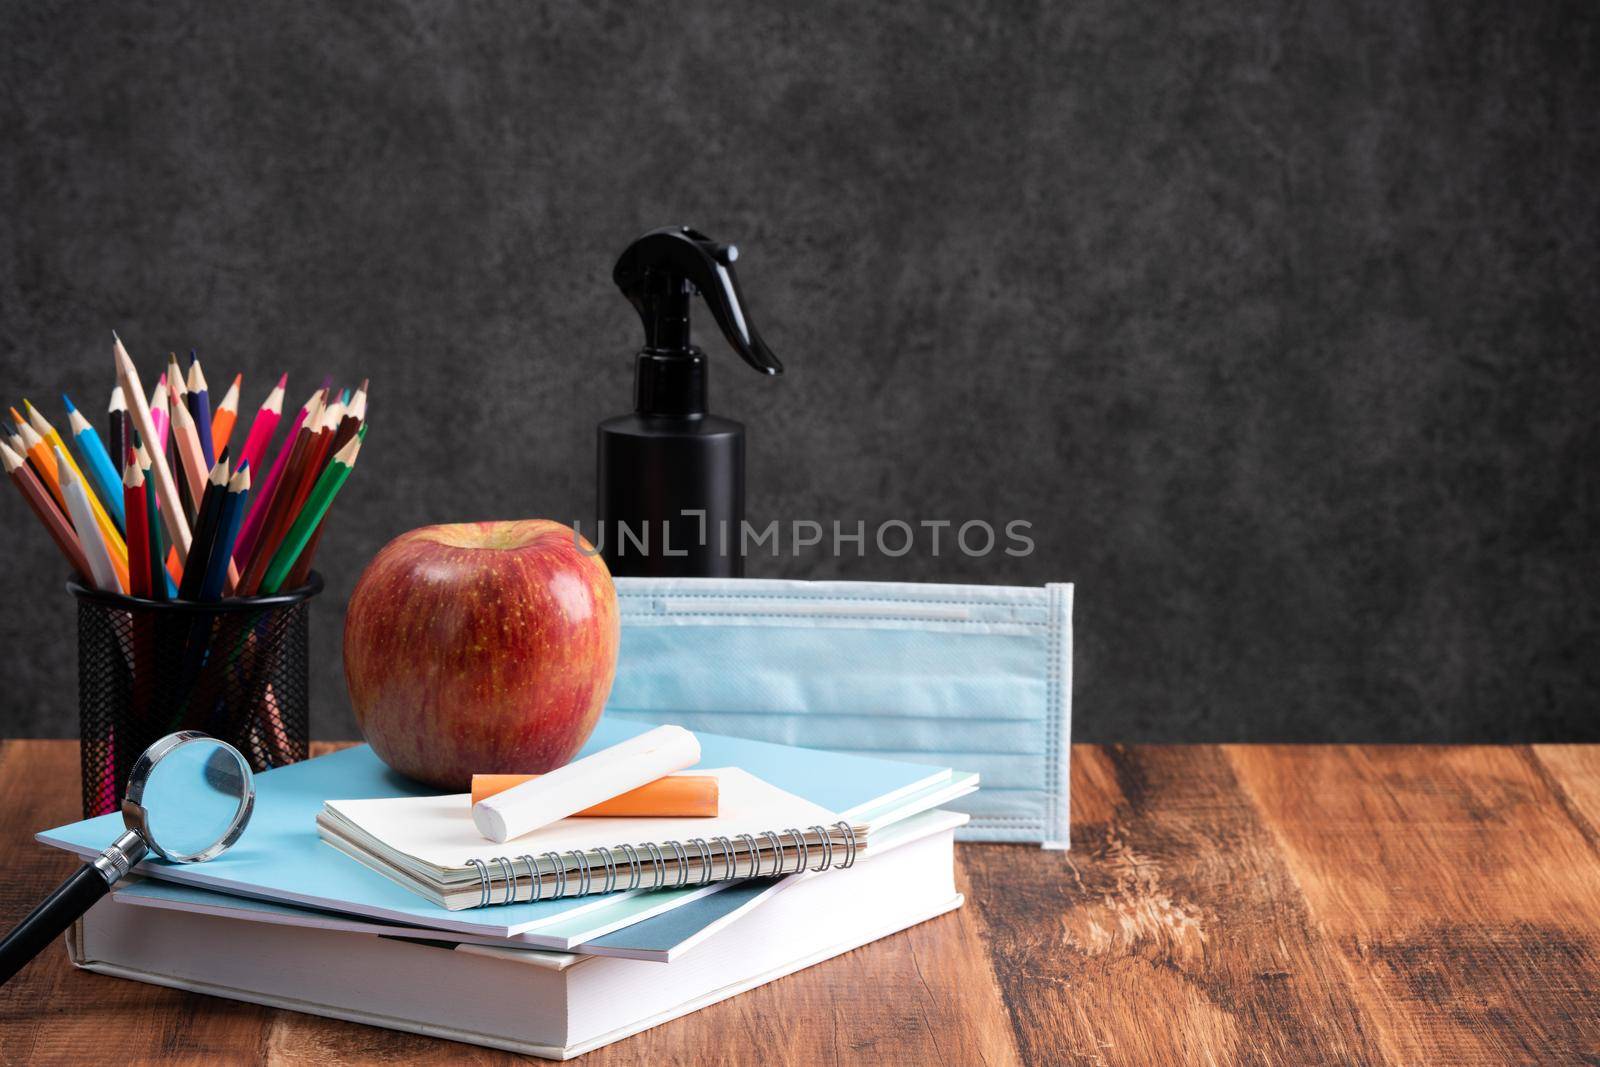 Back to school design concept with stationery over wooden table background. by ROMIXIMAGE